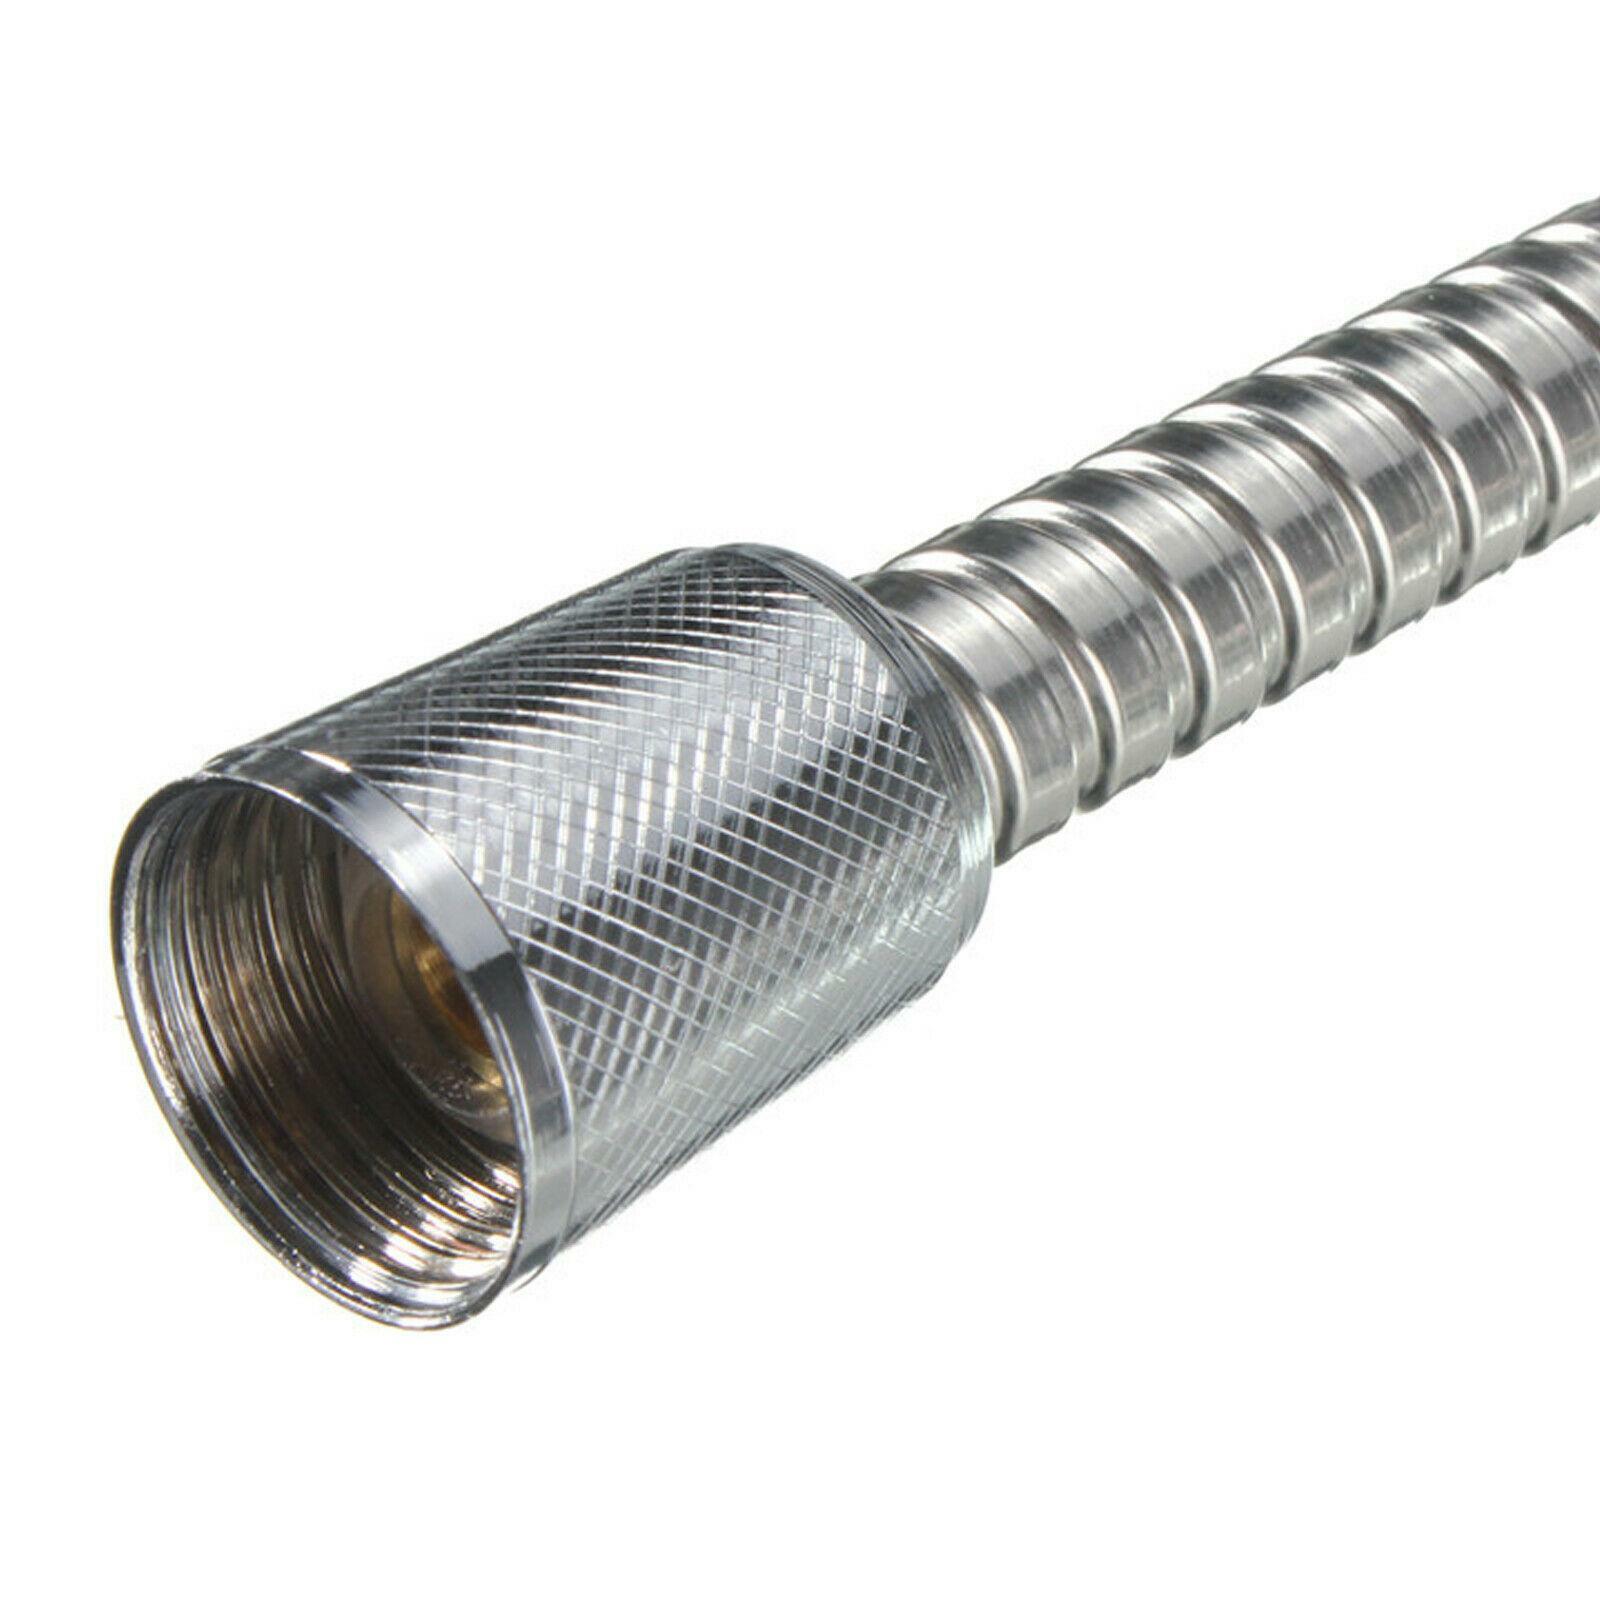 High Quality Stainless Steel Flexible Shower Hose